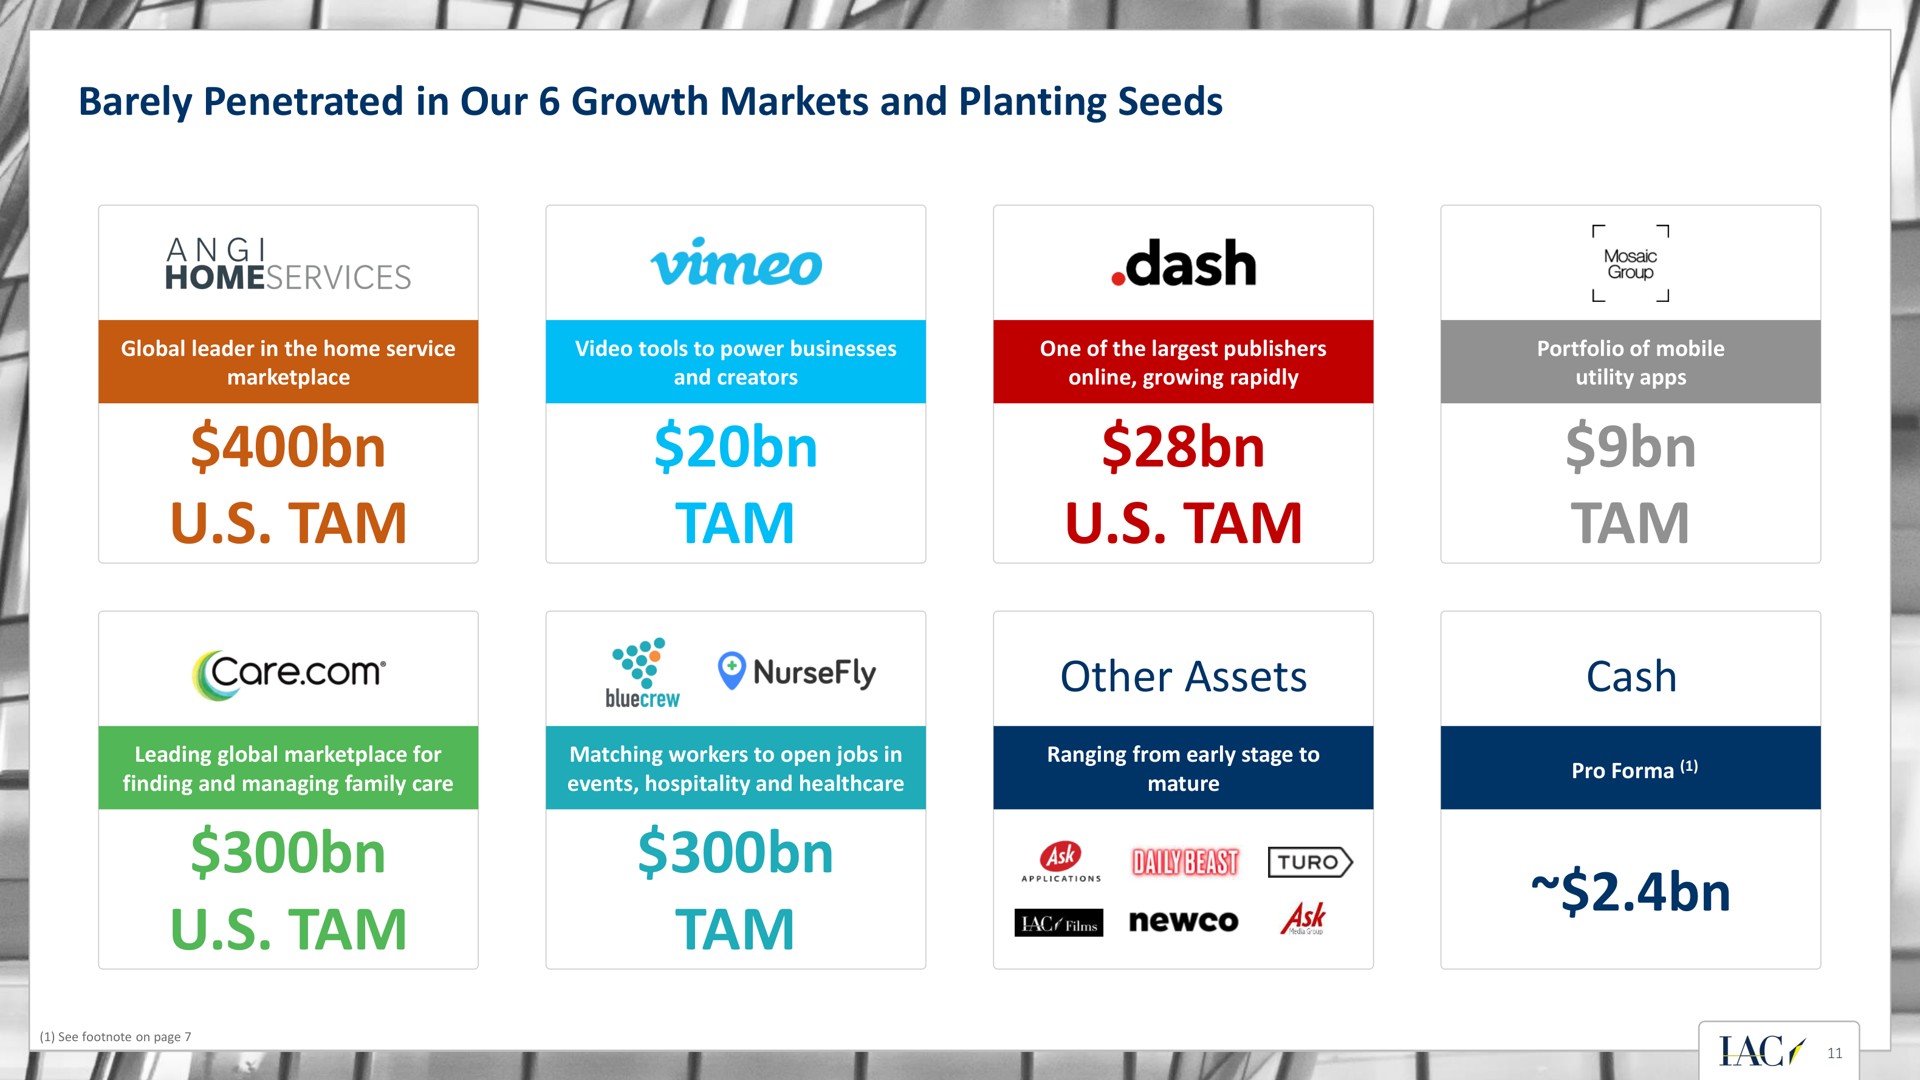 barely penetrated in our growth markets and planting seeds tam tam tam other assets tam tam tam cash foo dash care as | IAC